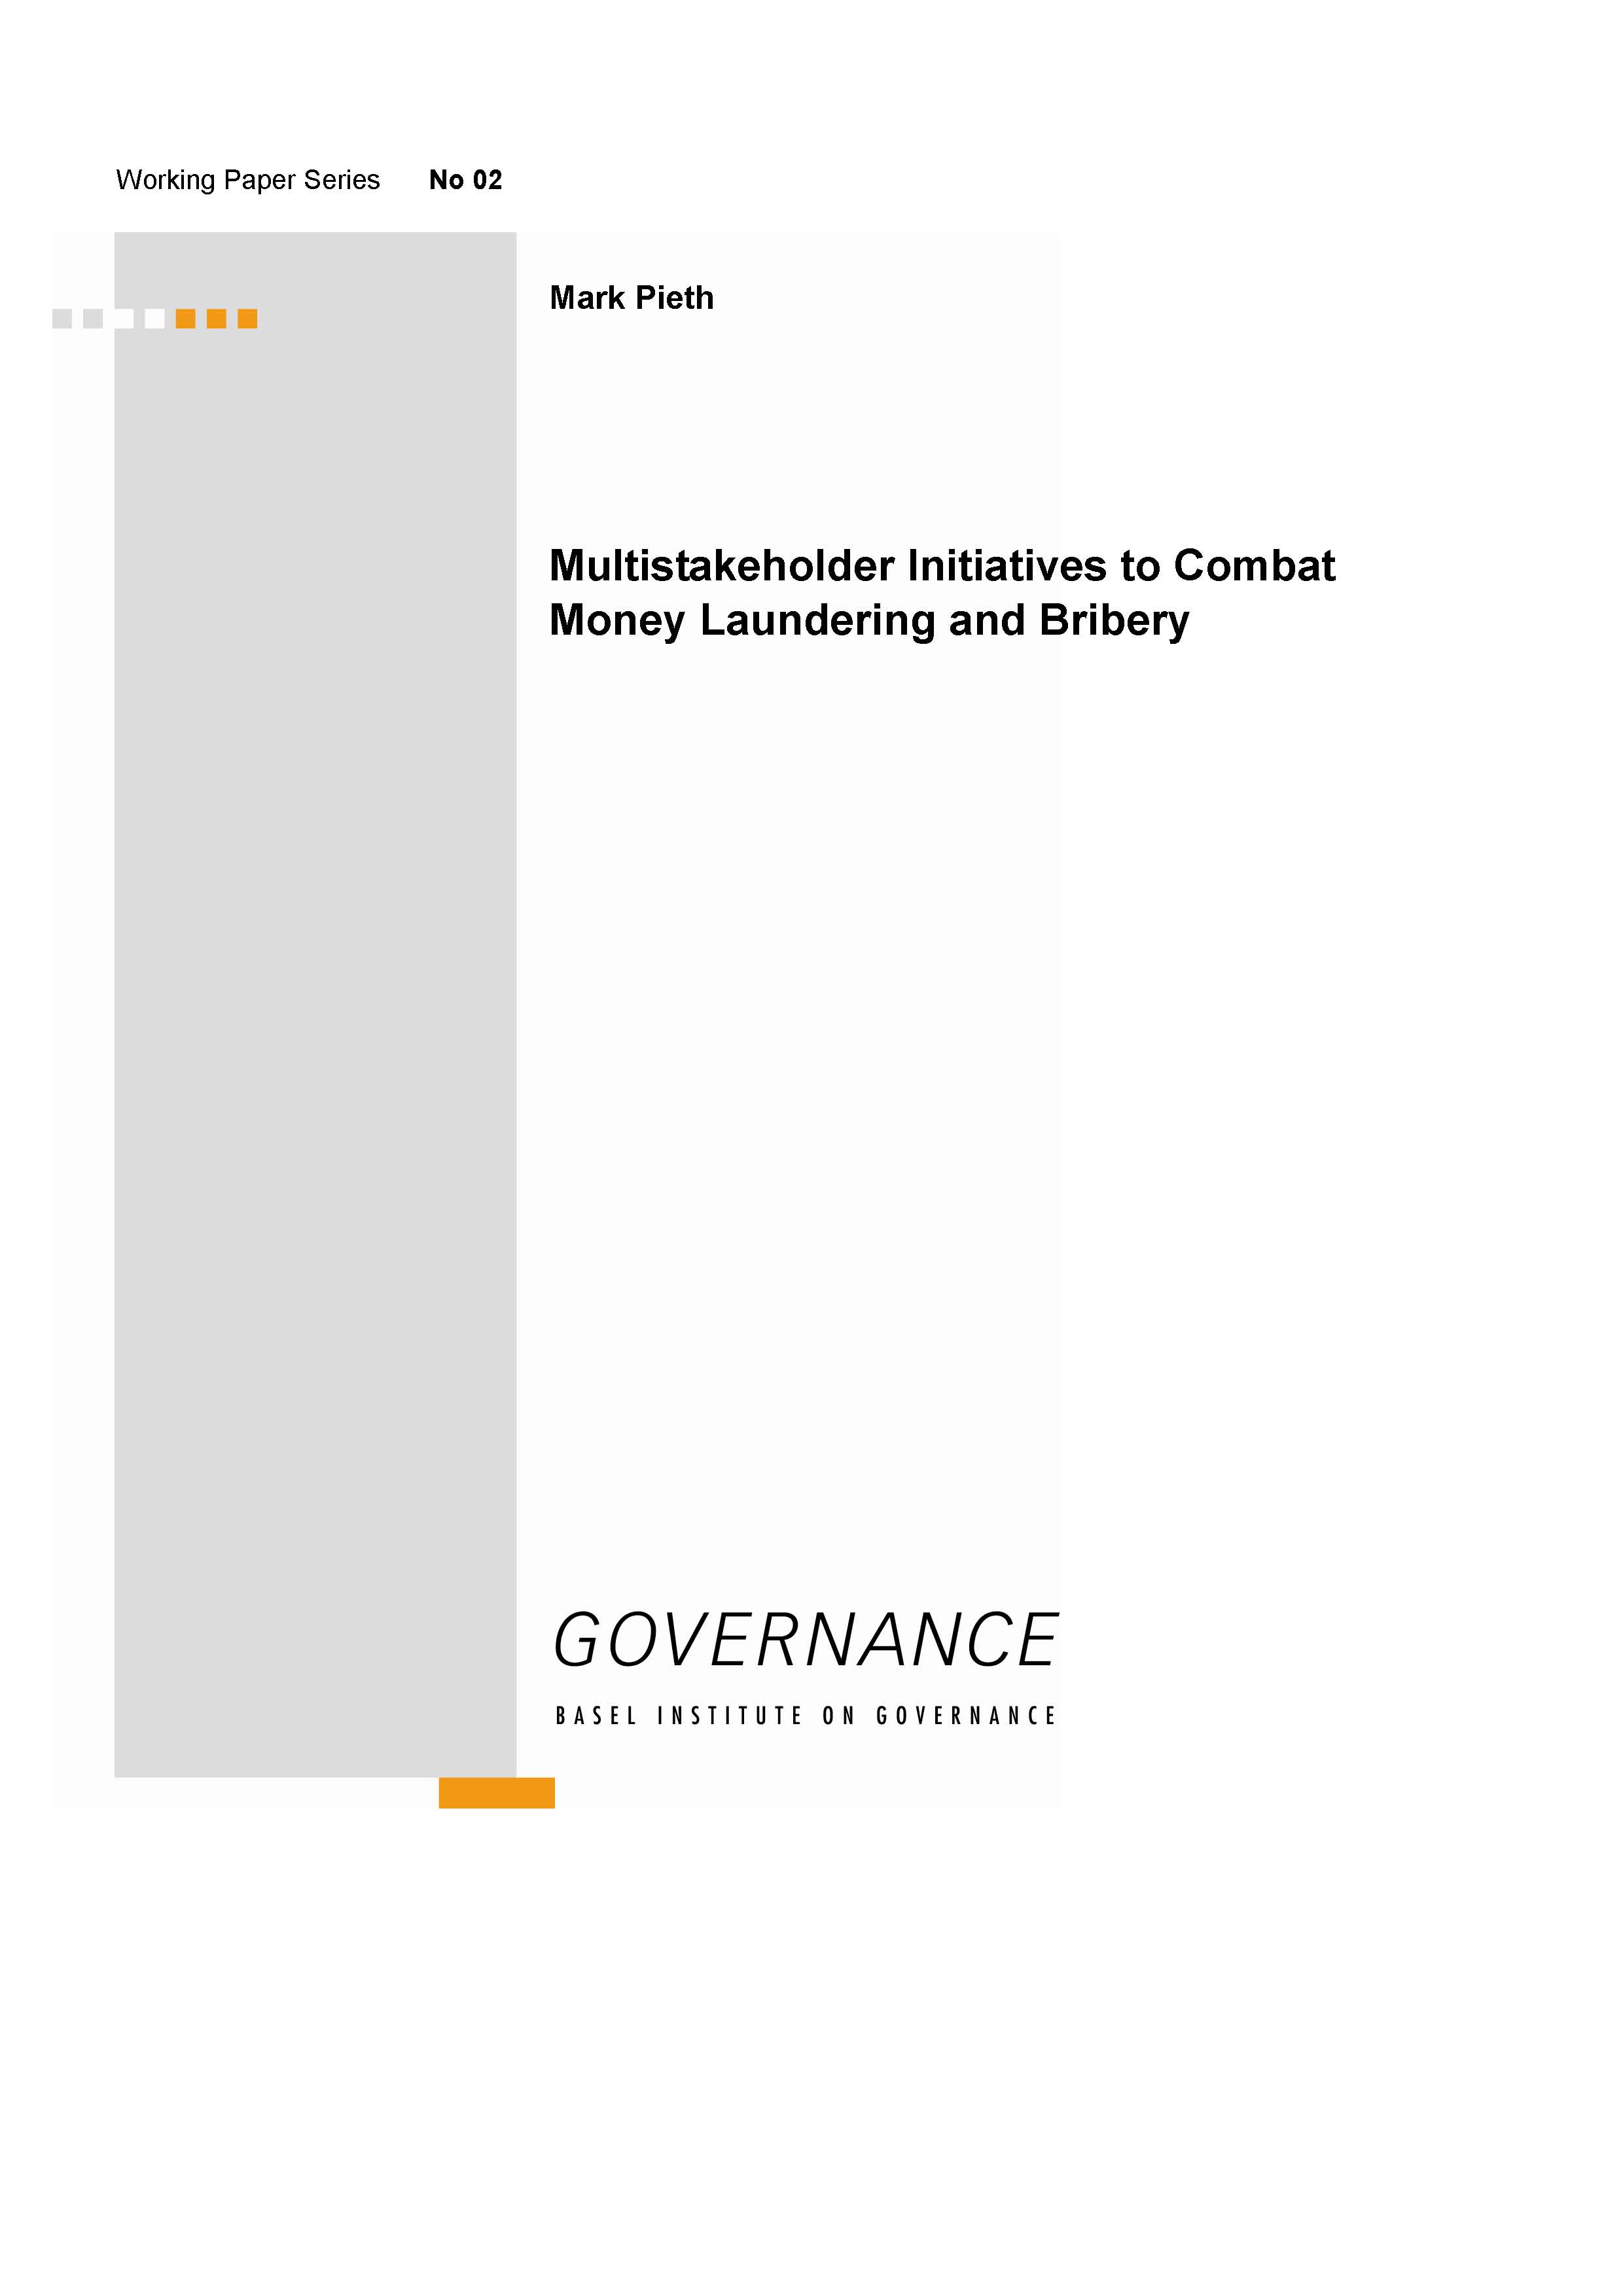 Front page of Multistakeholder Initiatives to Combat Money Laundering and Bribery